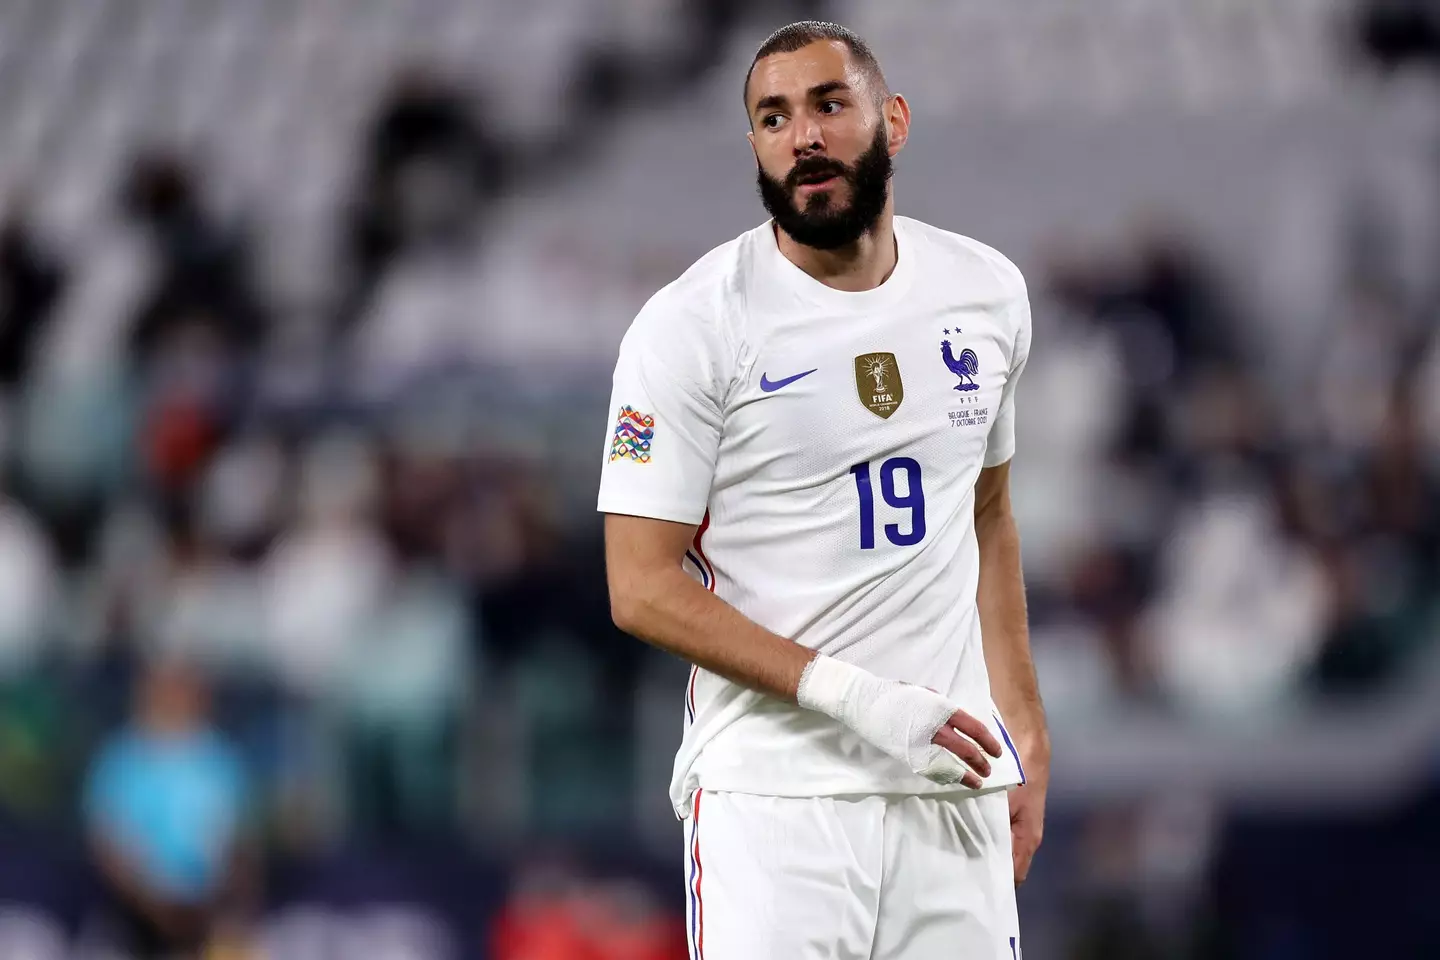 Real Madrid captain Karim Benzema has been ruled out of the World Cup for Didier Deschamps’ France squad.